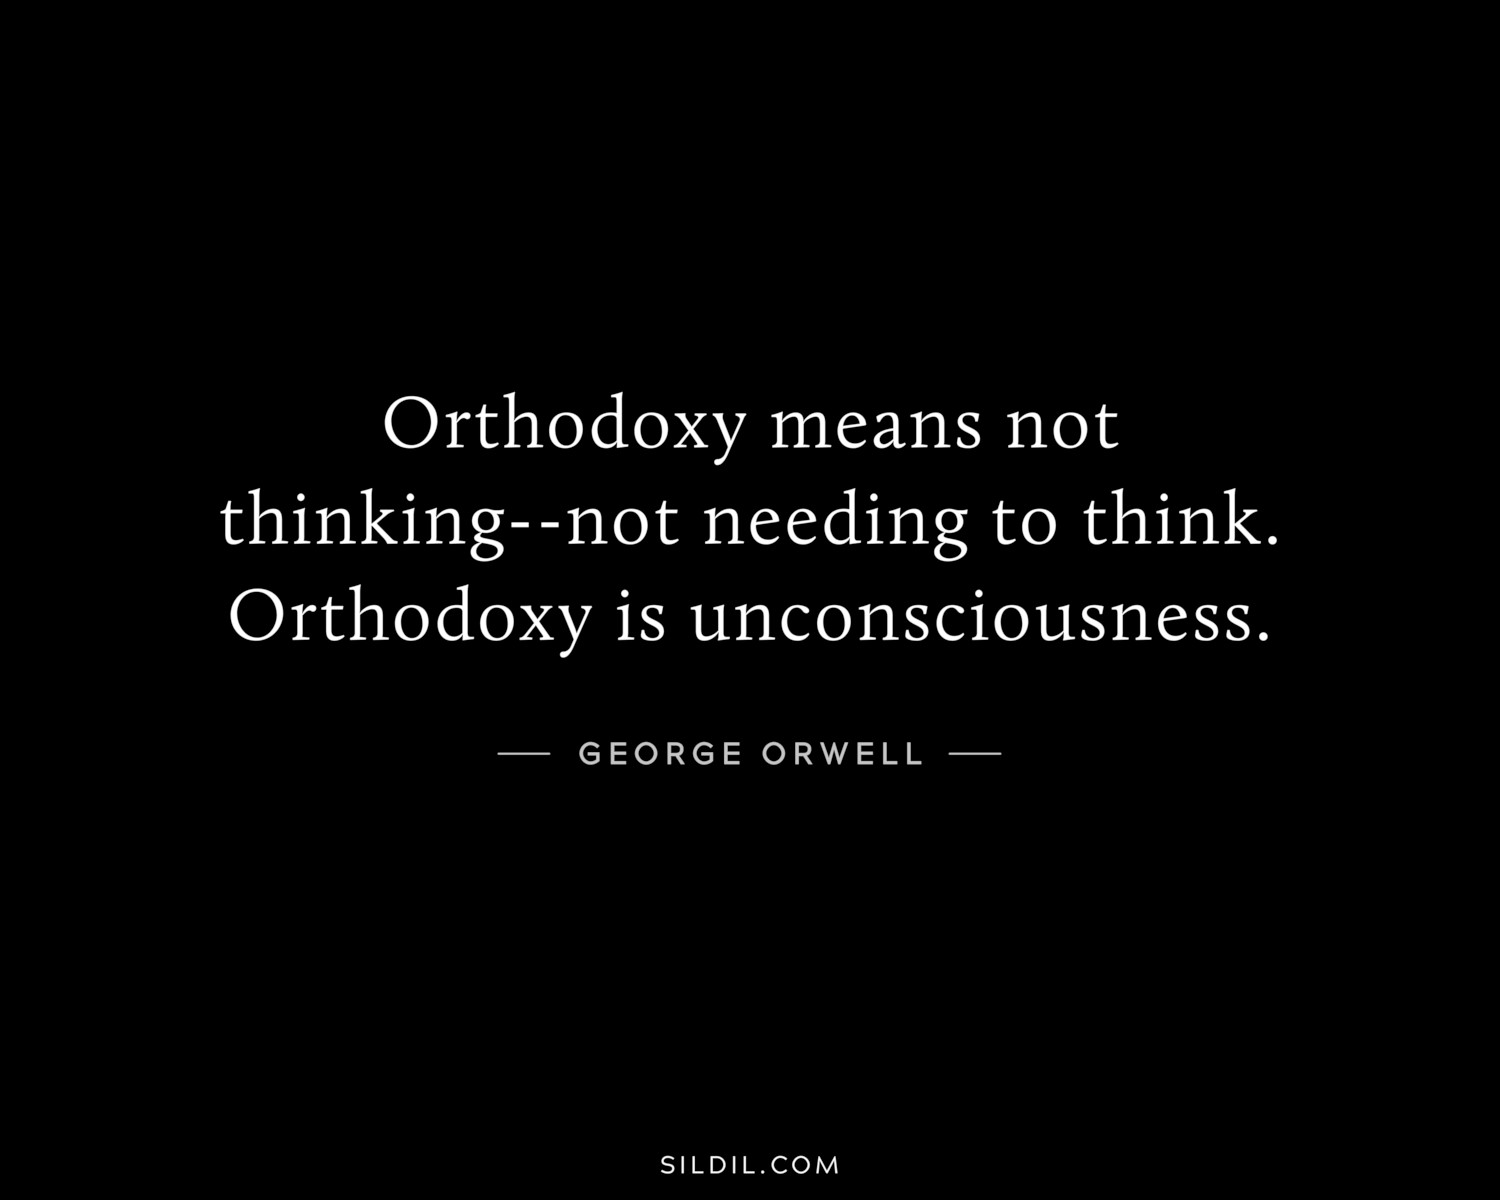 Orthodoxy means not thinking--not needing to think. Orthodoxy is unconsciousness.